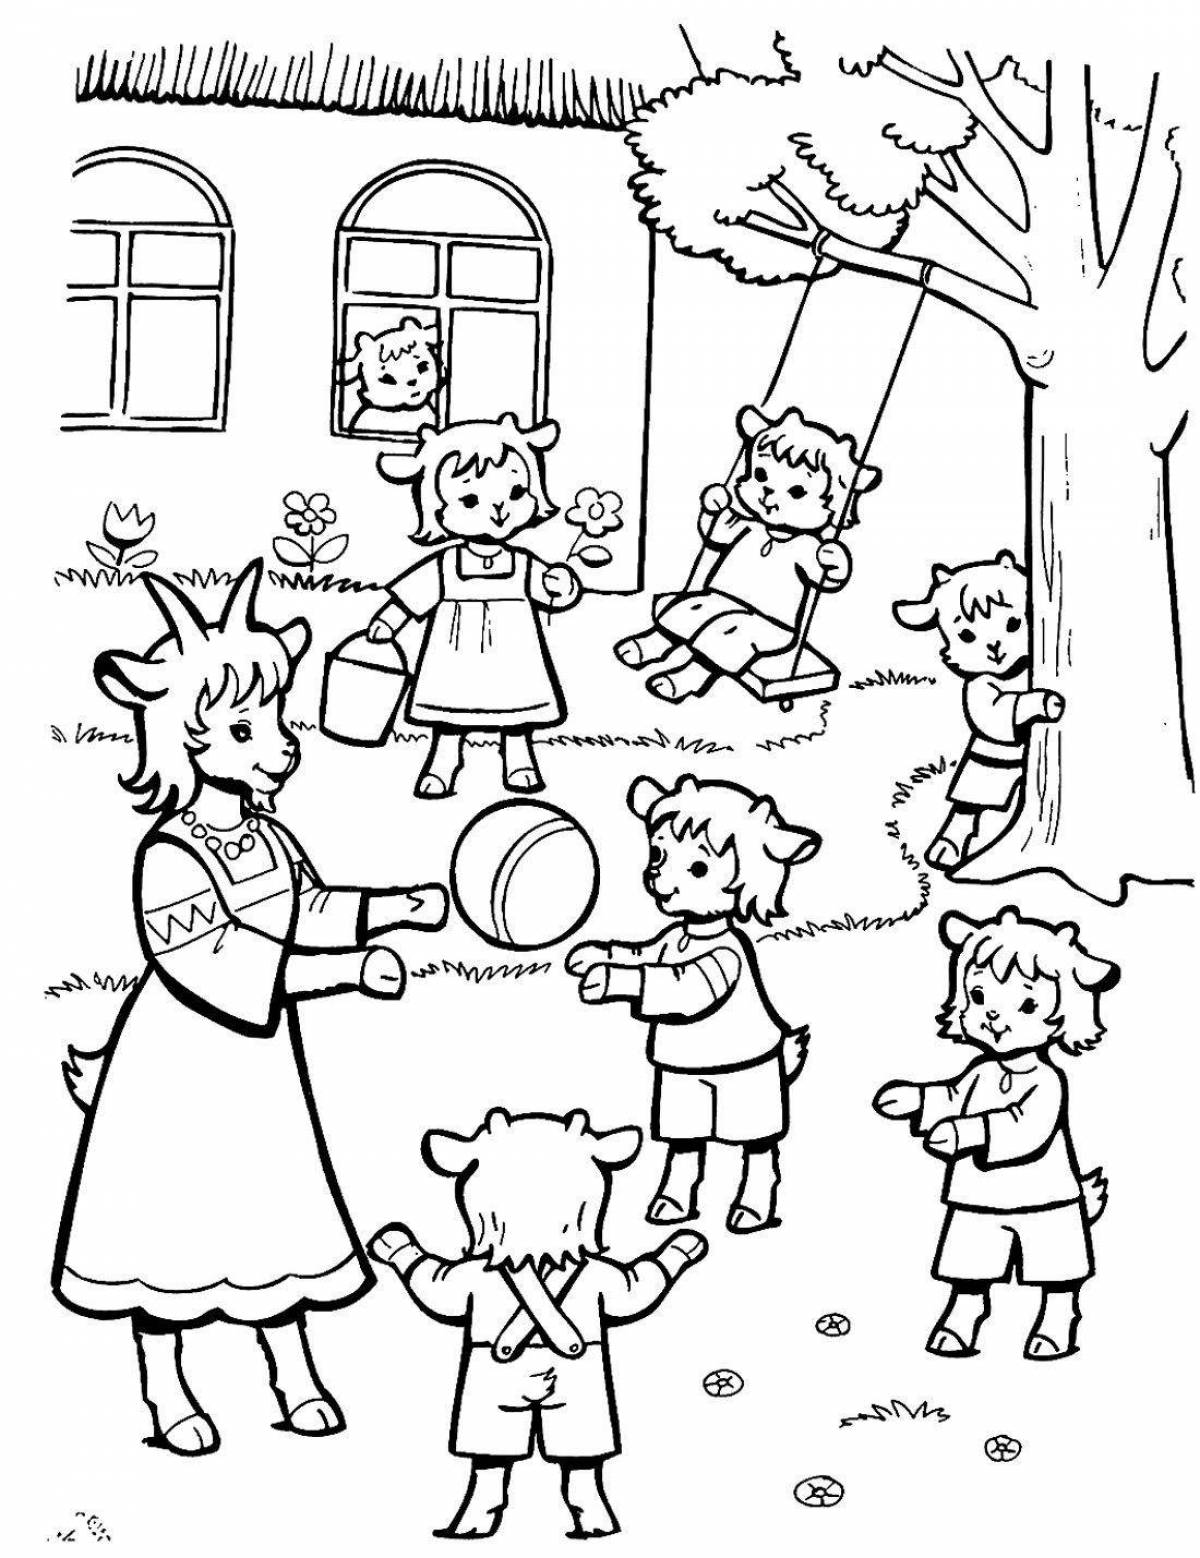 Colorful wolf and seven children coloring poster